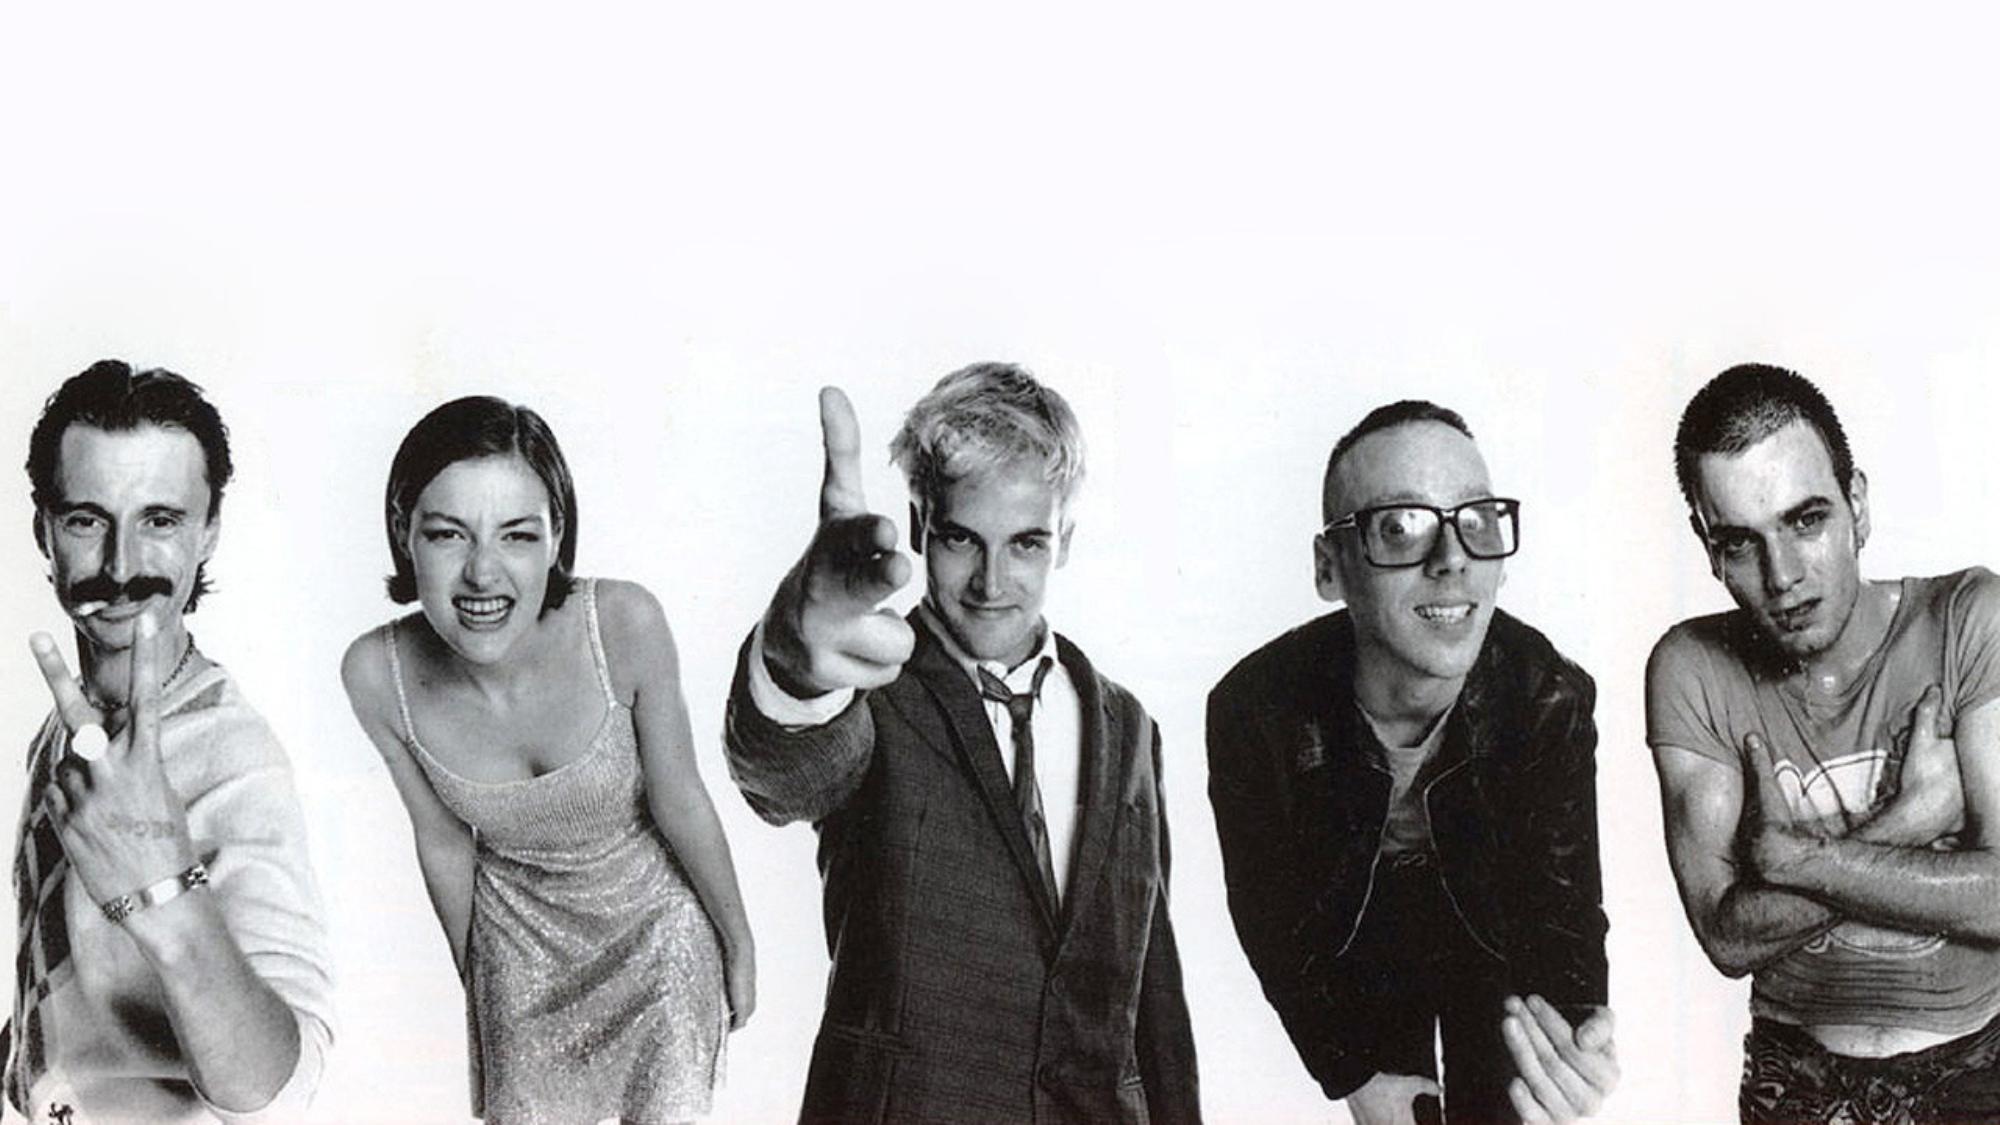 trainspotting-where-are-they-now-1441883862